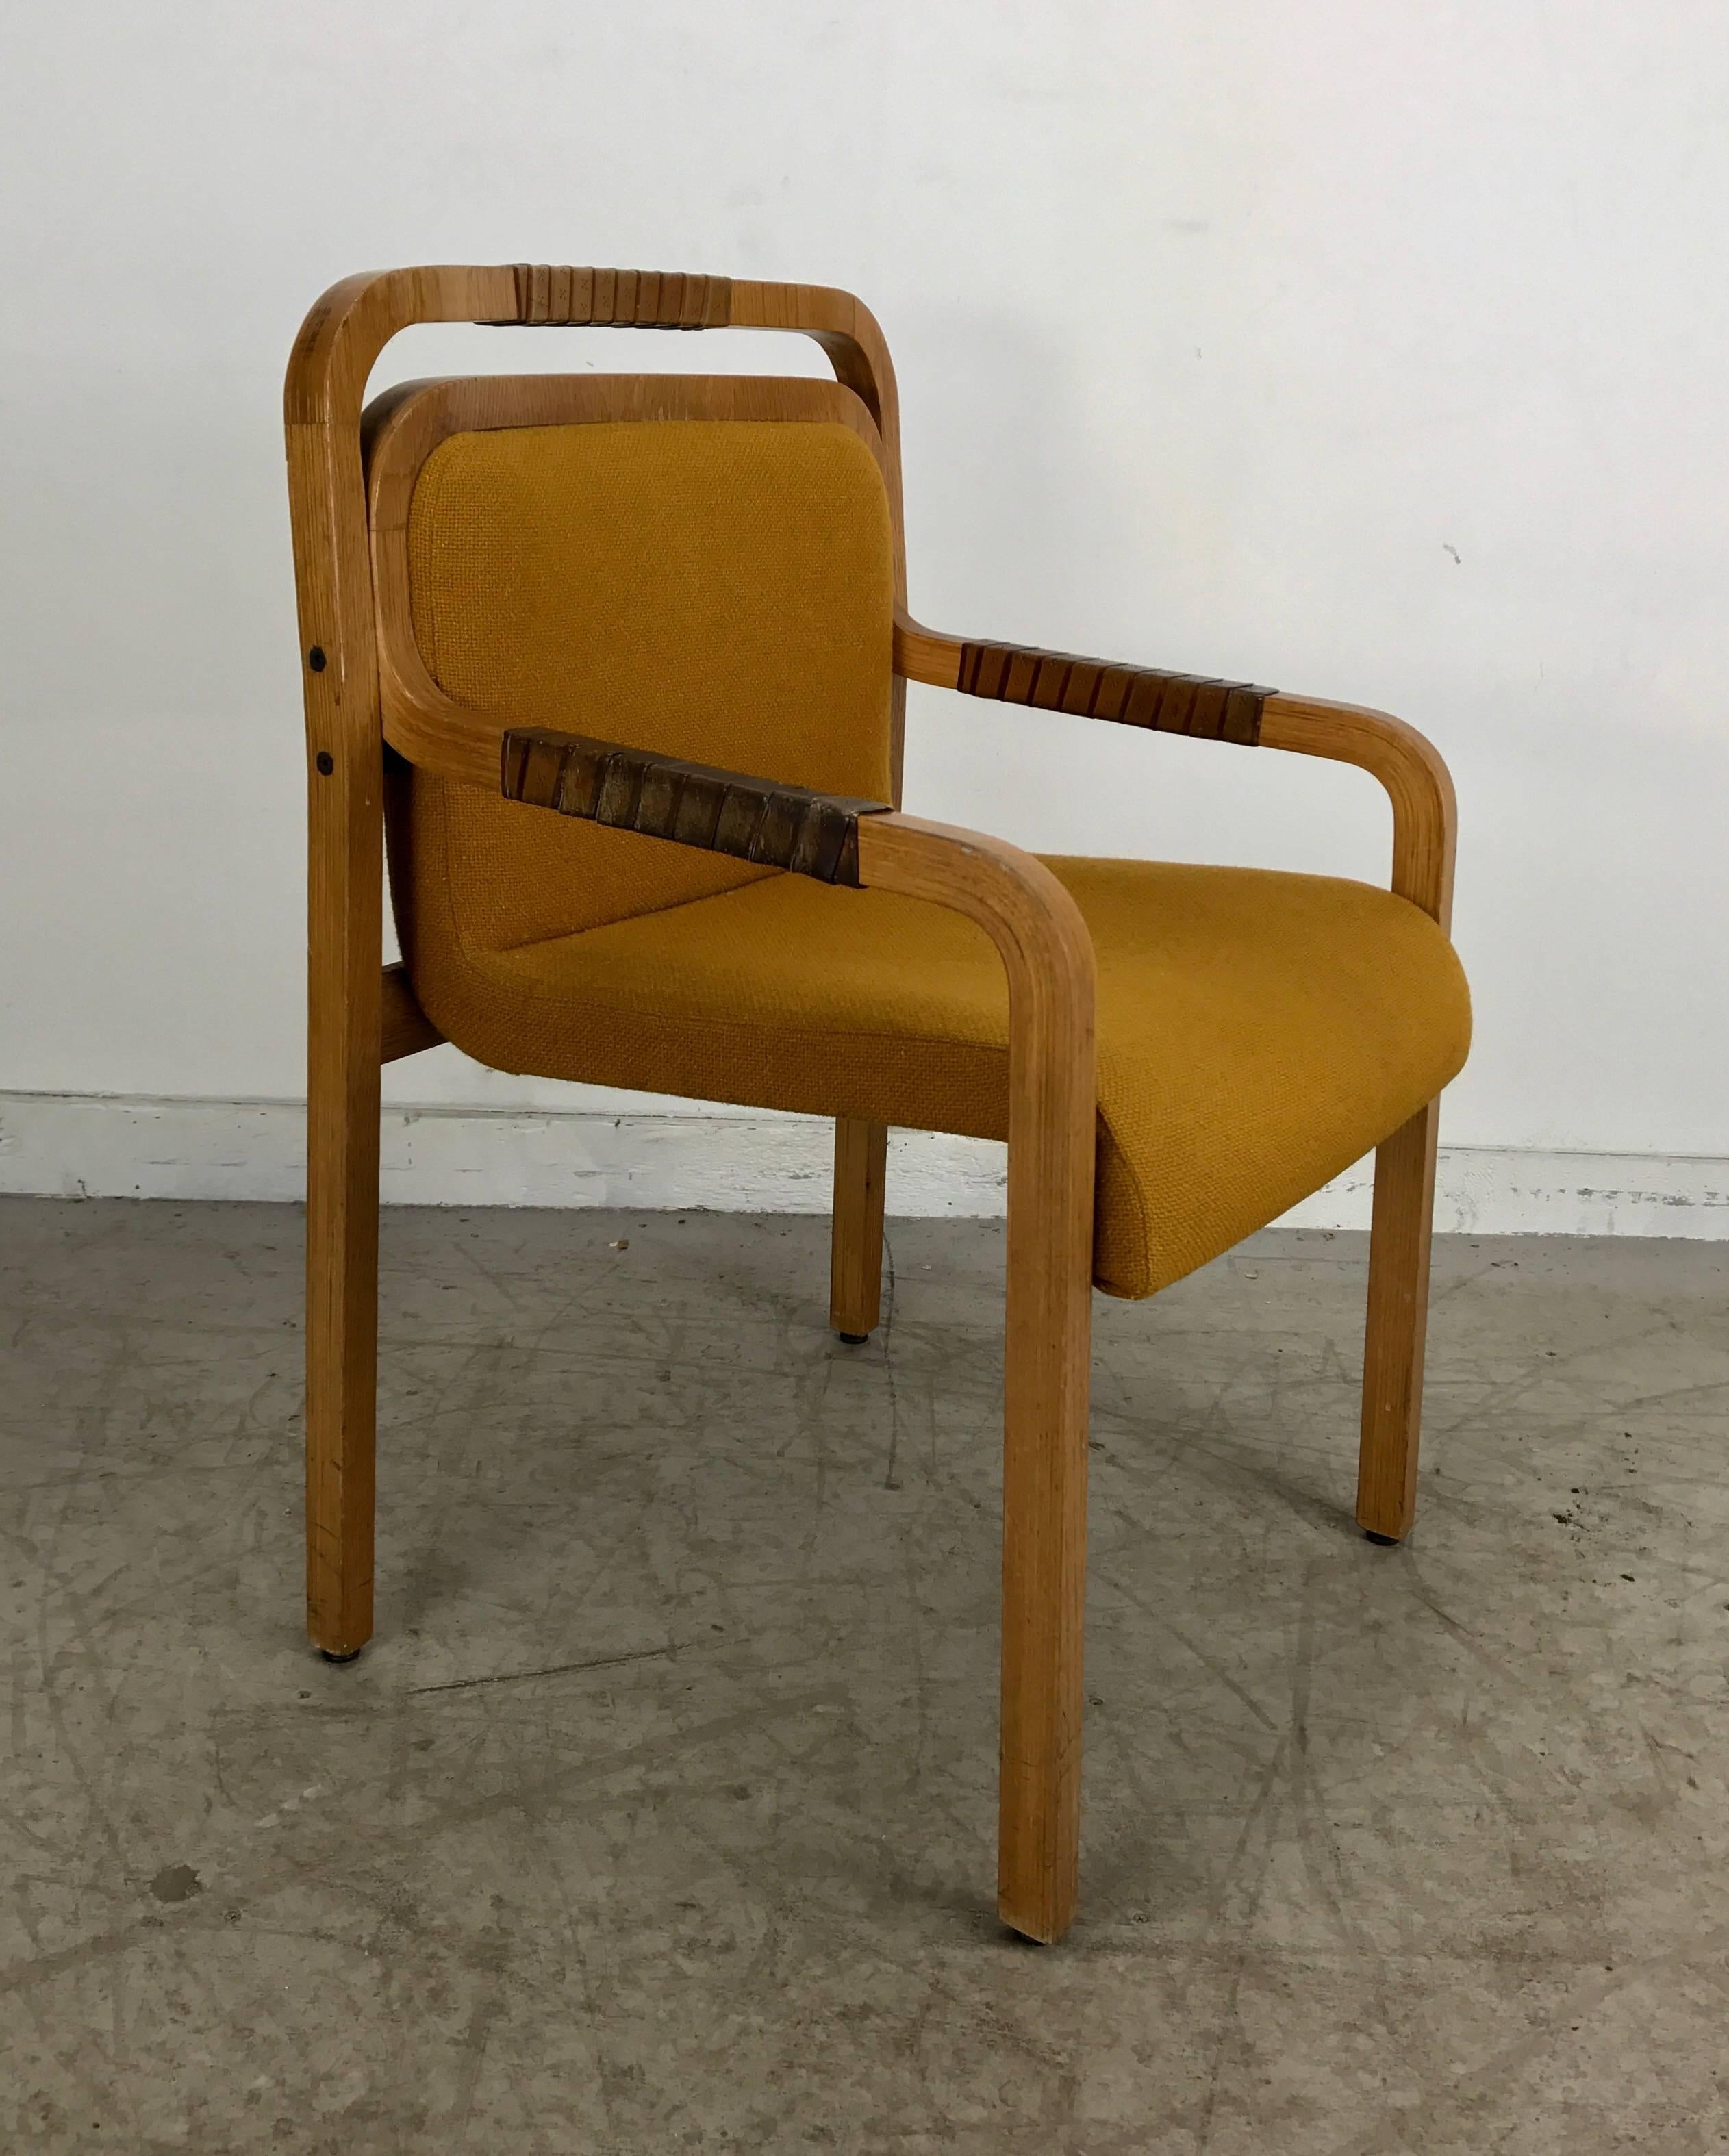 Unusual modernist arm or desk chair made by Gunlock. Extremely comfortable, solid sturdy construction, Architectural profile. Retains original leather wrapped arms and back detailing as well as original wool fabric upholstery.